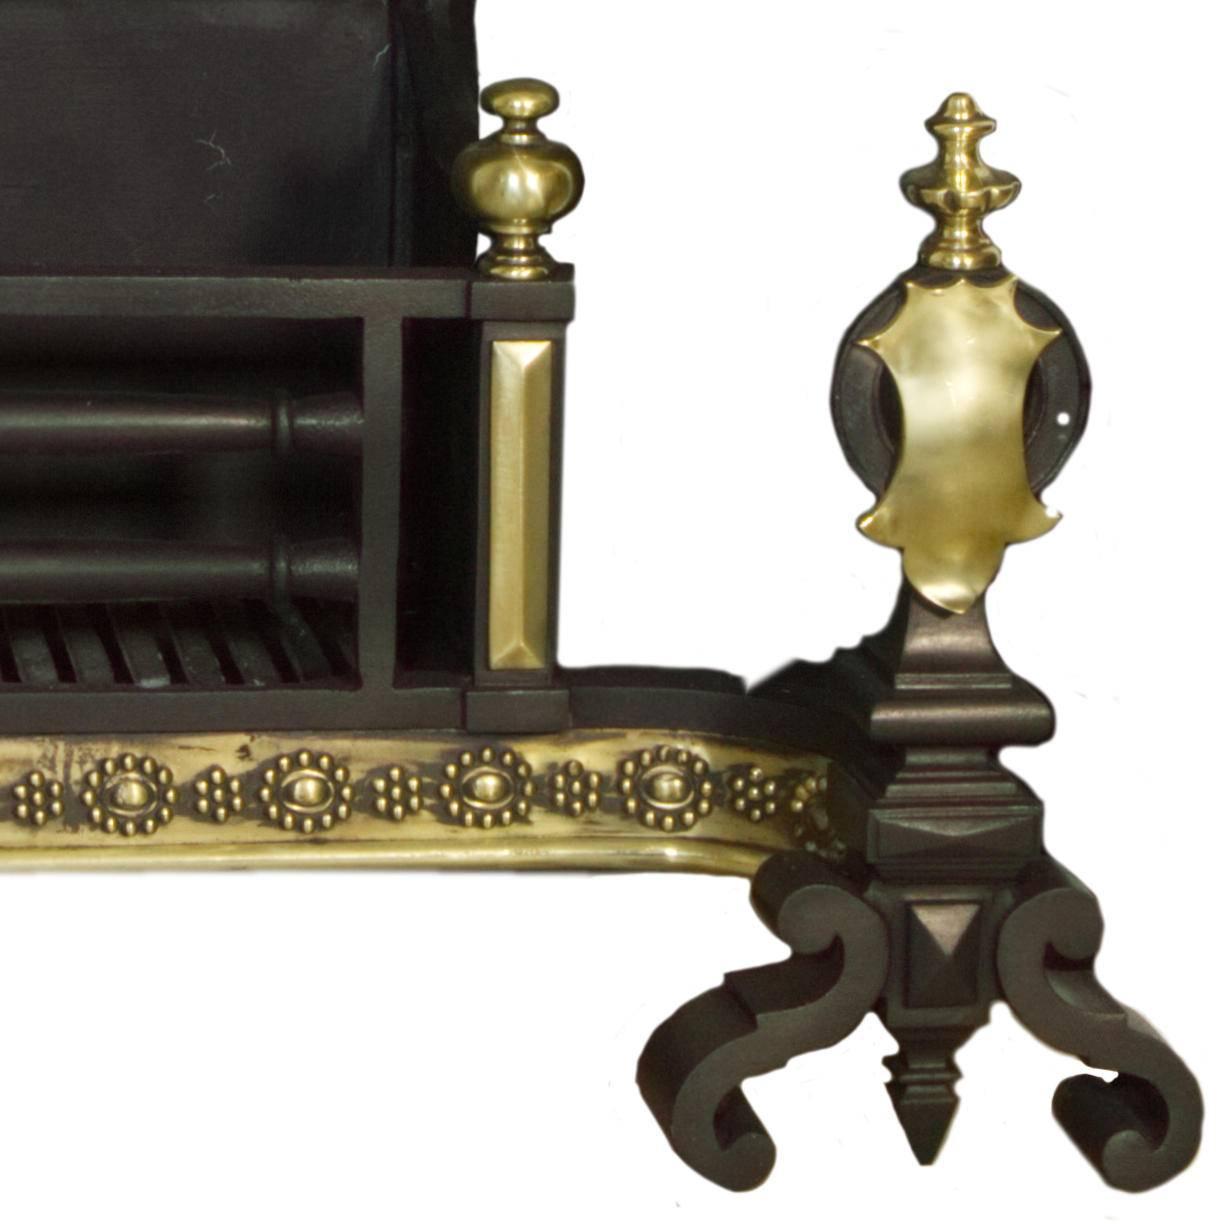 An exceptional rare large English 18th century cast iron and polished brass fire basket. With a decorative high fire-back, detailed brass fret work to the apron, unique emblem applied to the fire dogs with solid brass finials. Salvaged from a